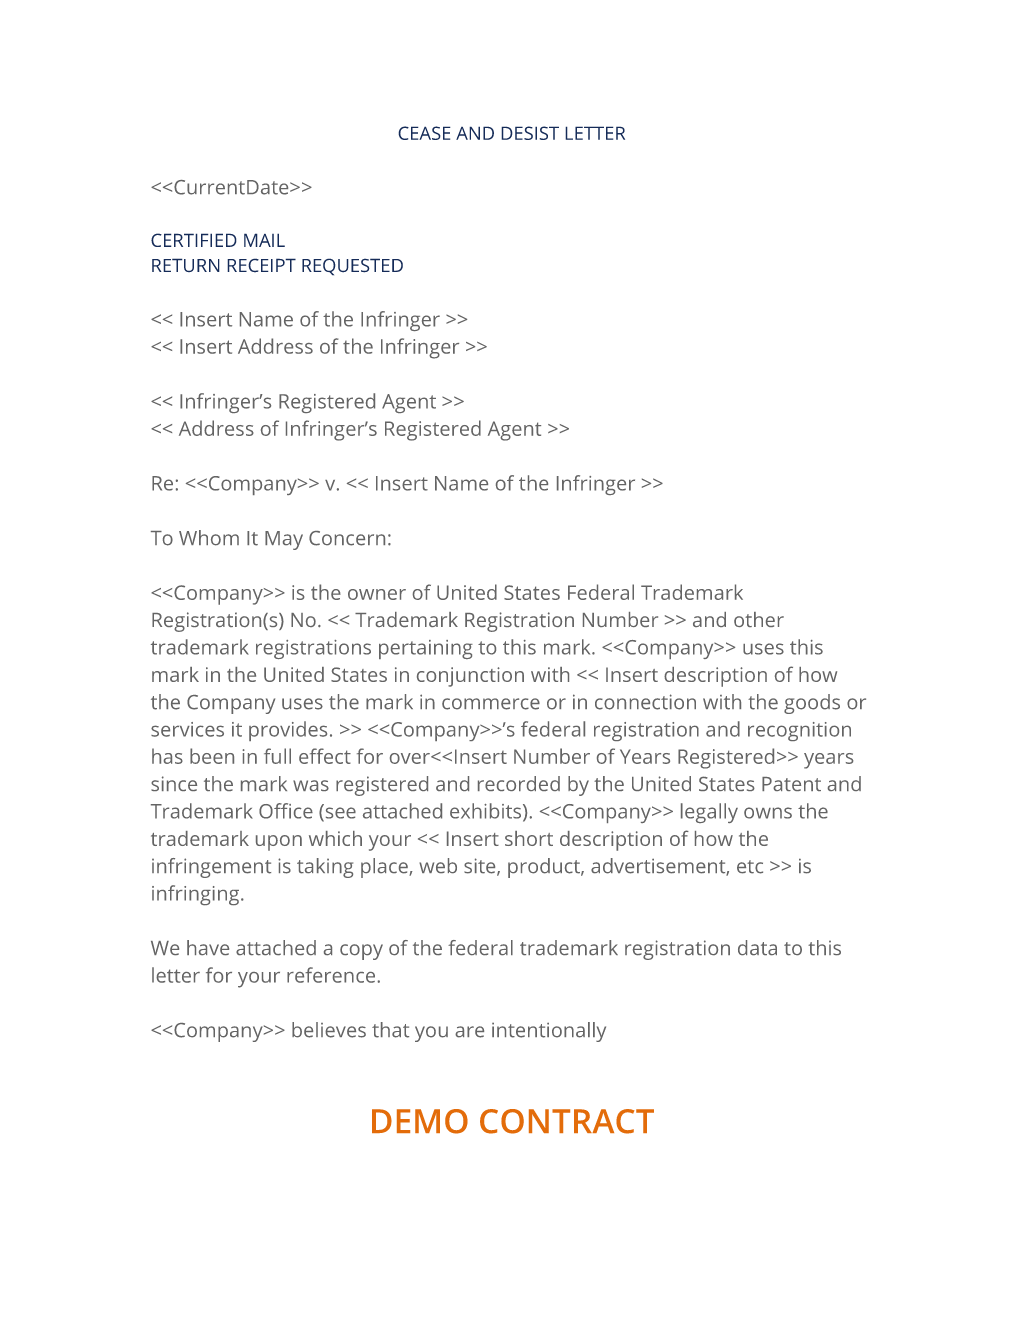 Cease & Desist Letter Template from mthomearts.com